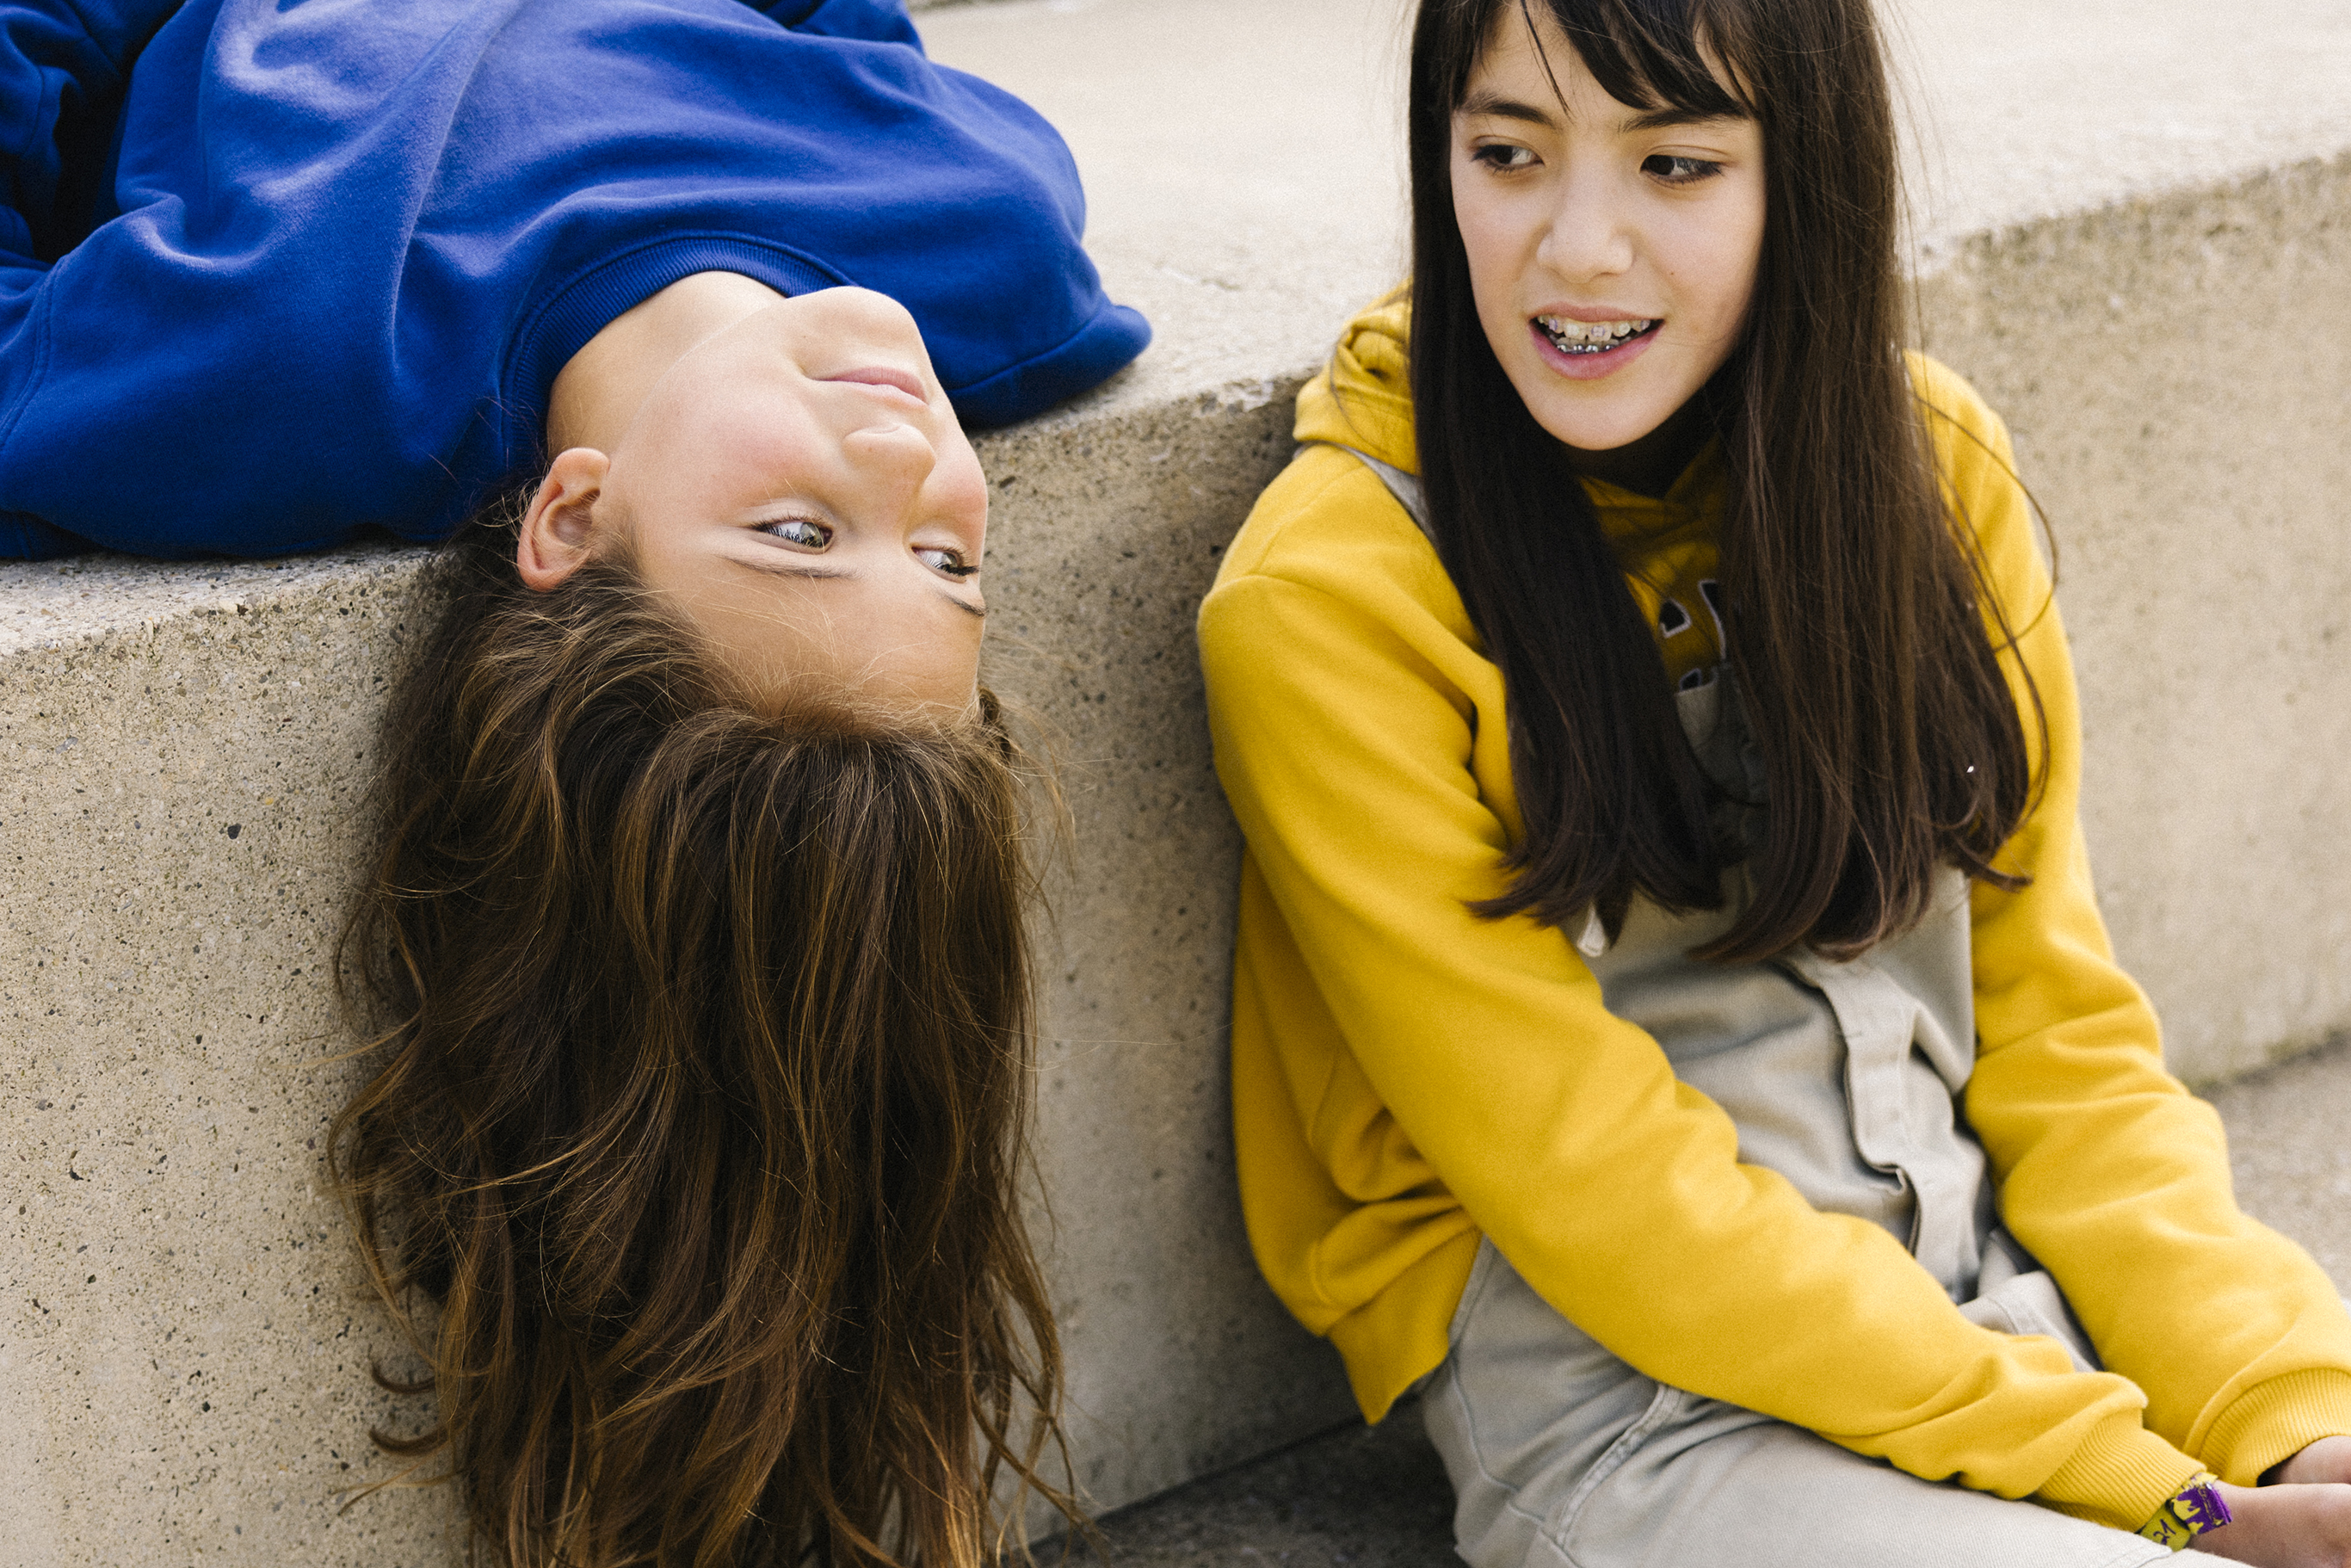 Two young women are talking on concrete steps, with one sittting on a step while another lies on the step on her back letting her head hang down.